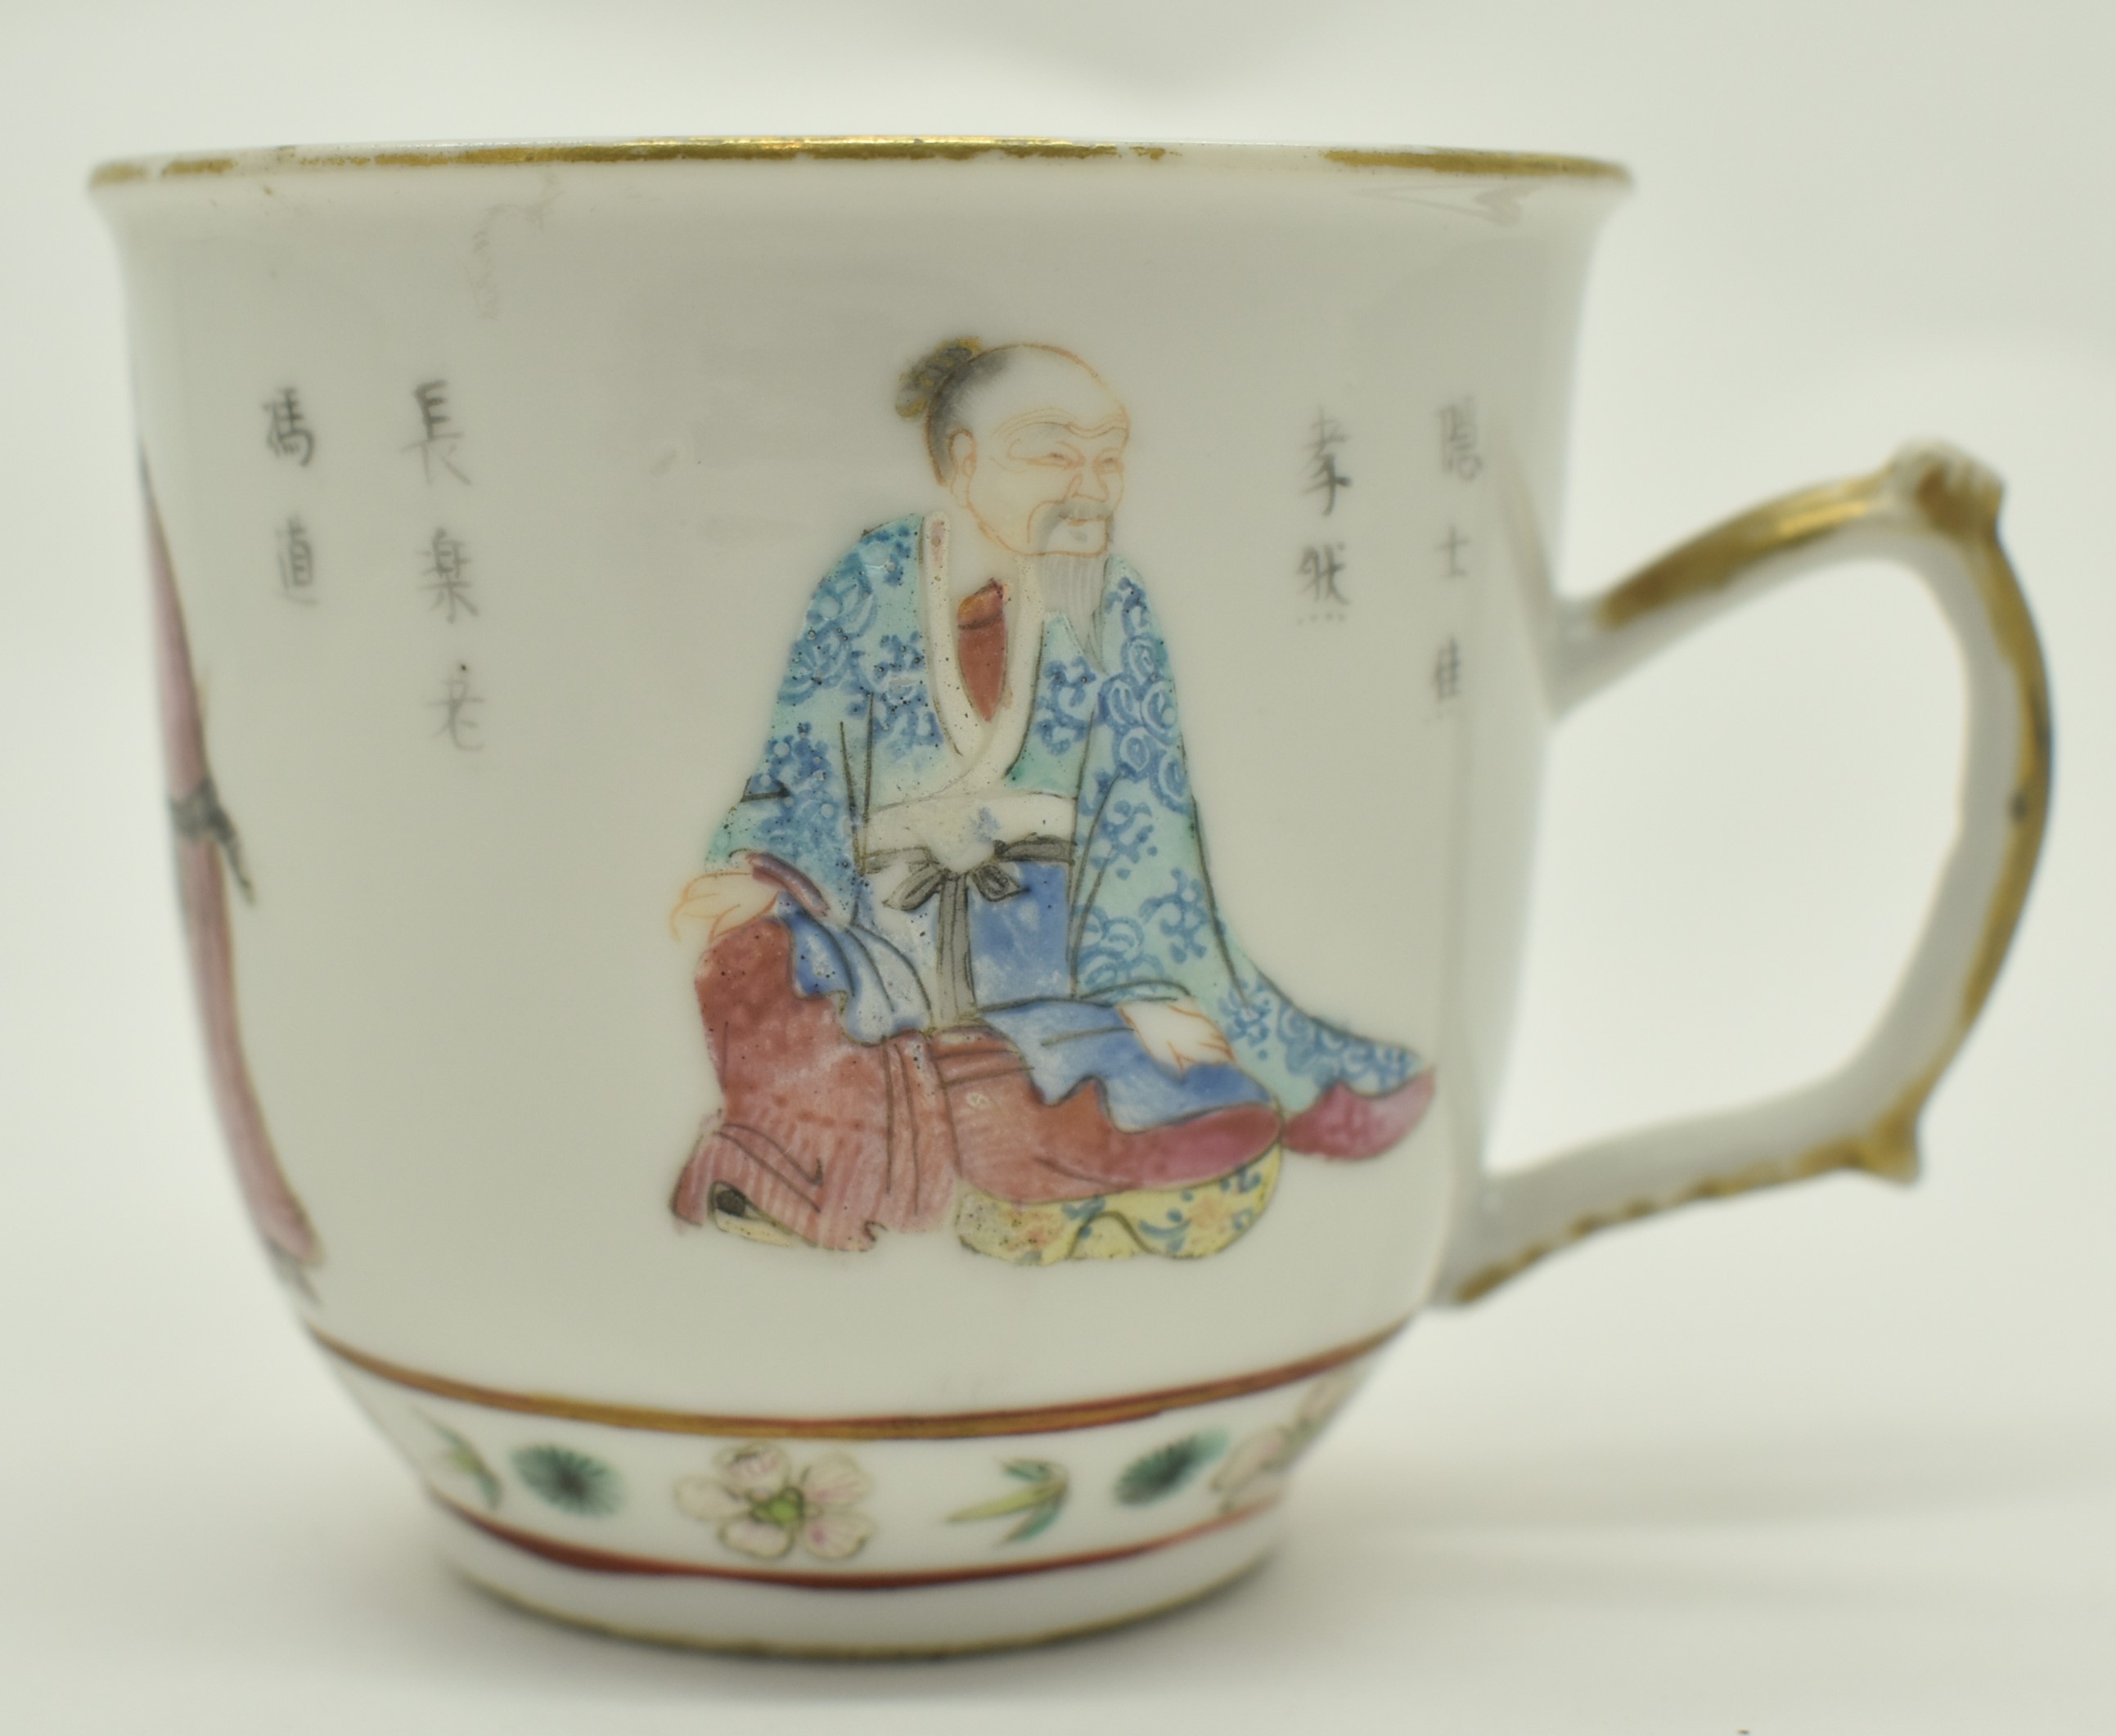 FAMILLE ROSE WU SHUANG PU CUP WITH HANDLE 道光粉彩无双谱人物杯 - Image 2 of 13